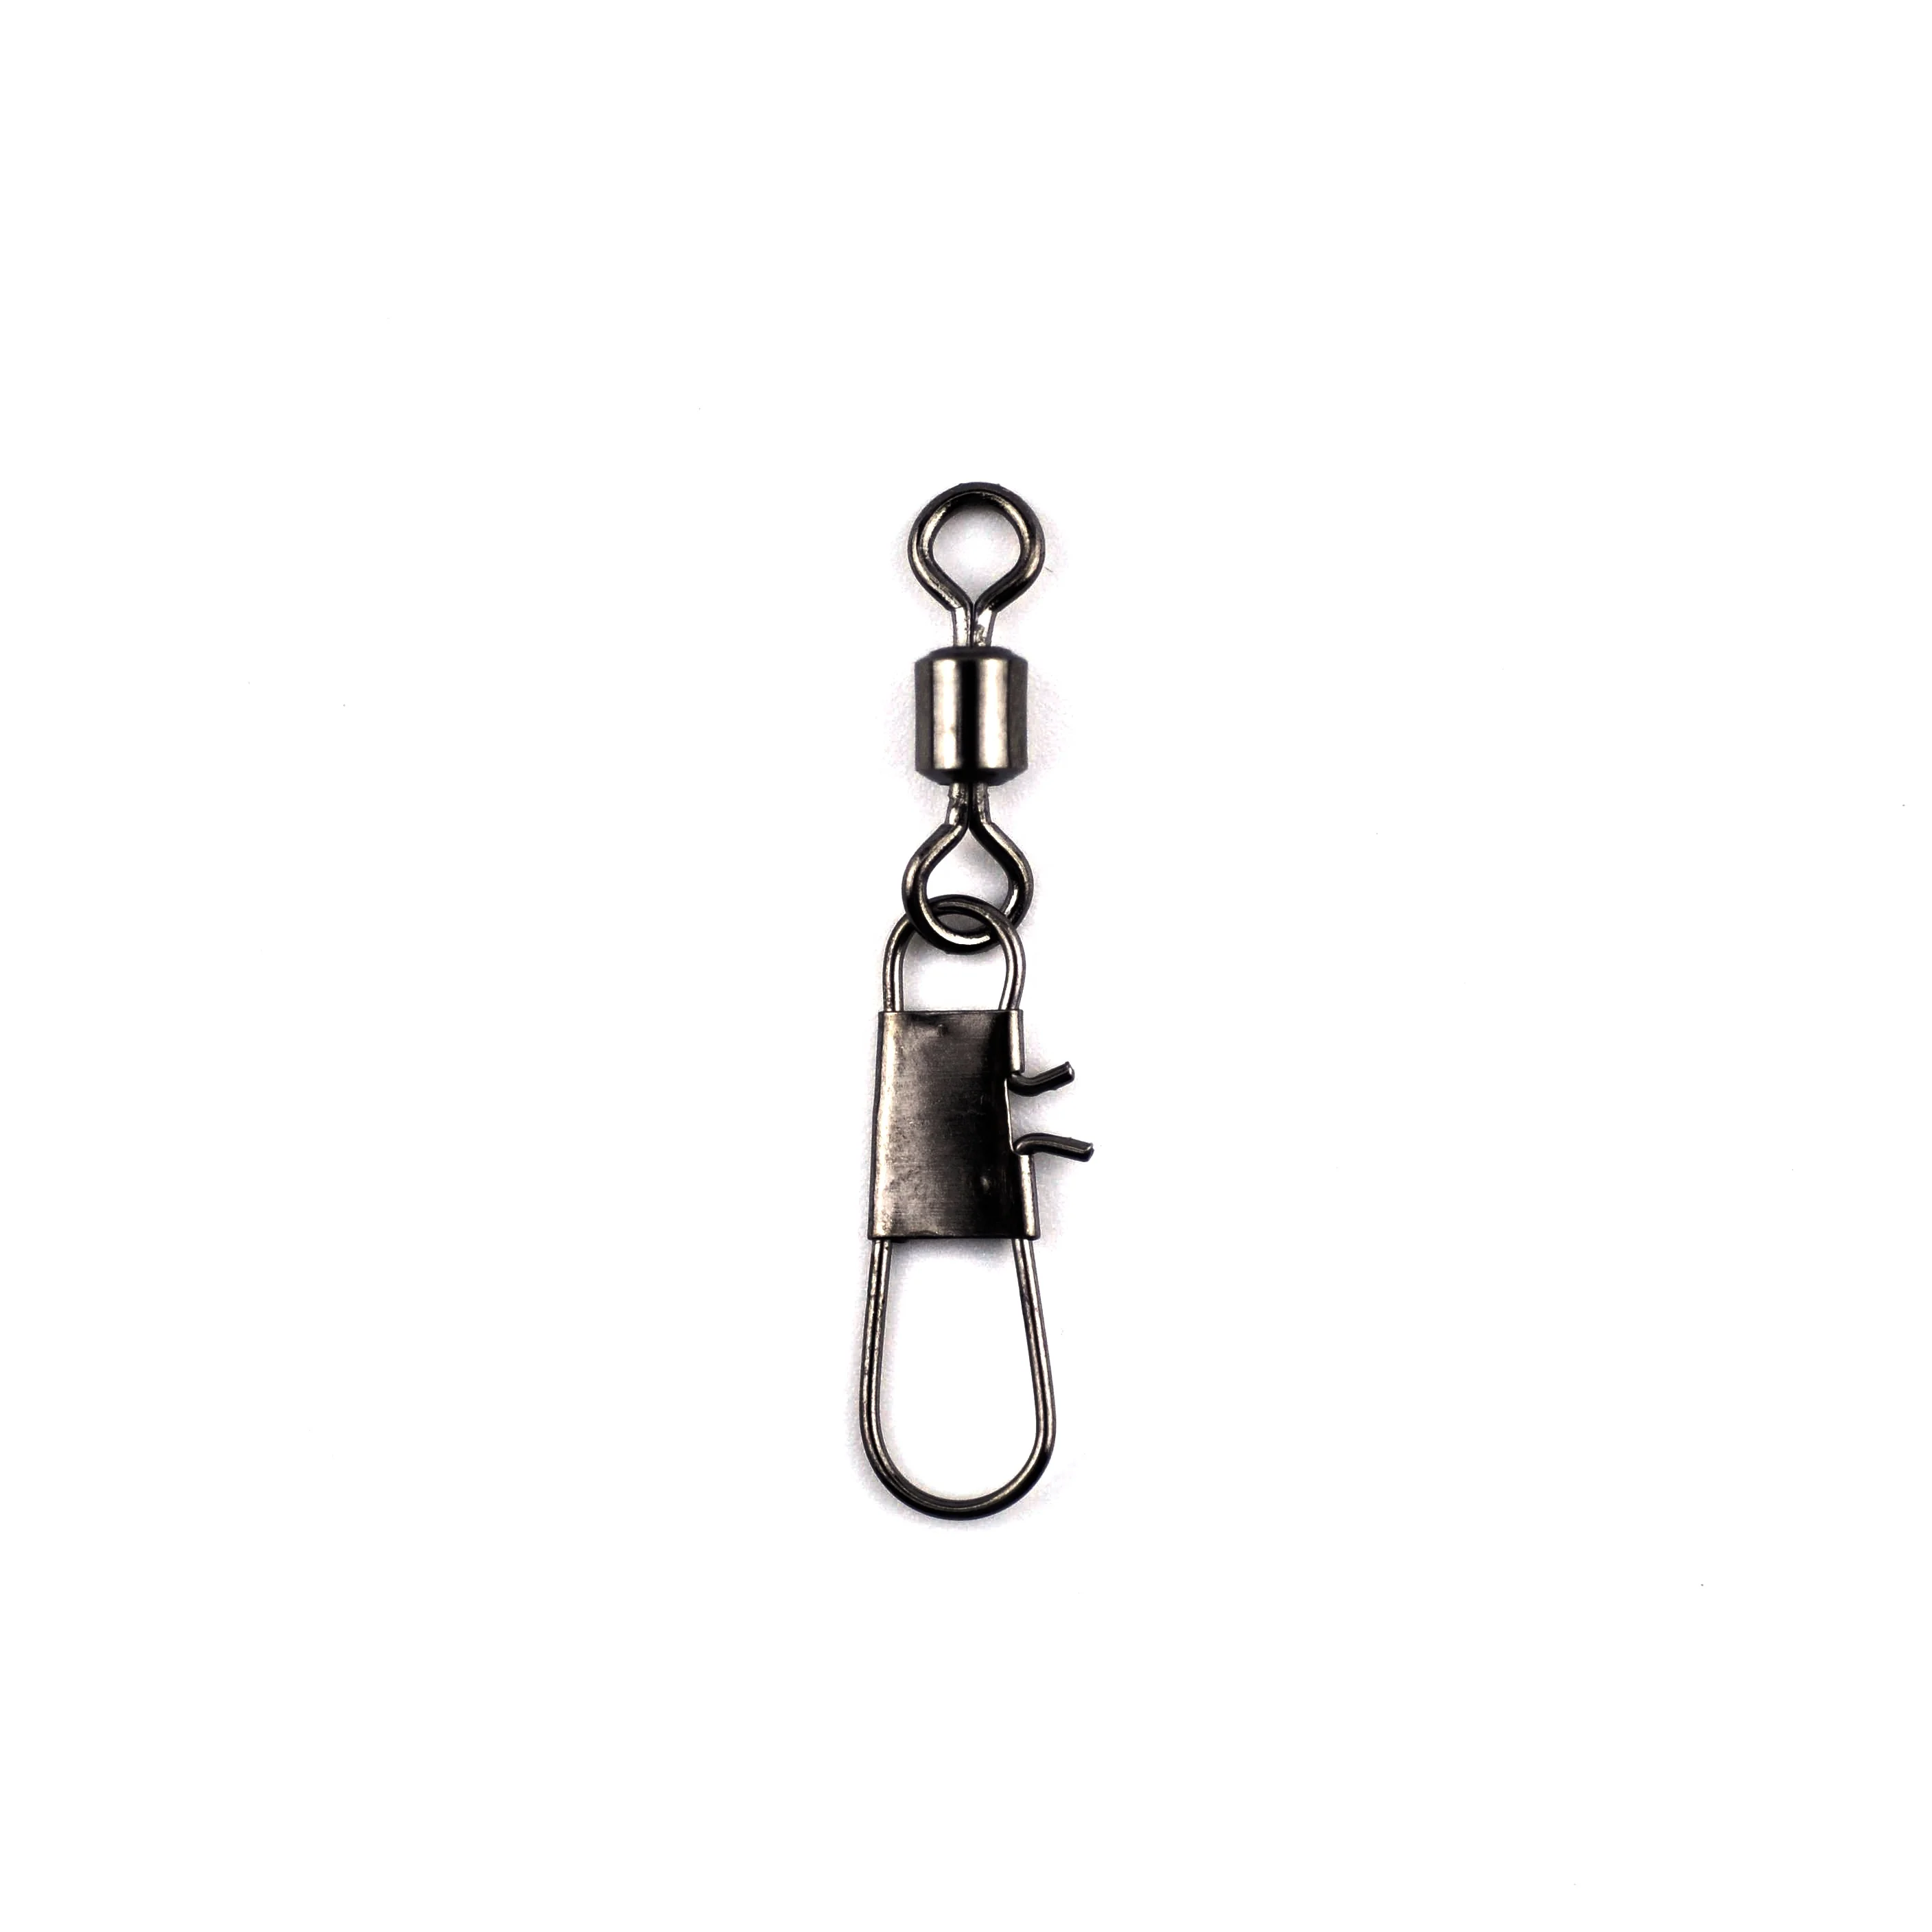 

Stainless Steel Fishing Rolling Swivel with Interlock-Snap Connector Fishing Tackle Accessory